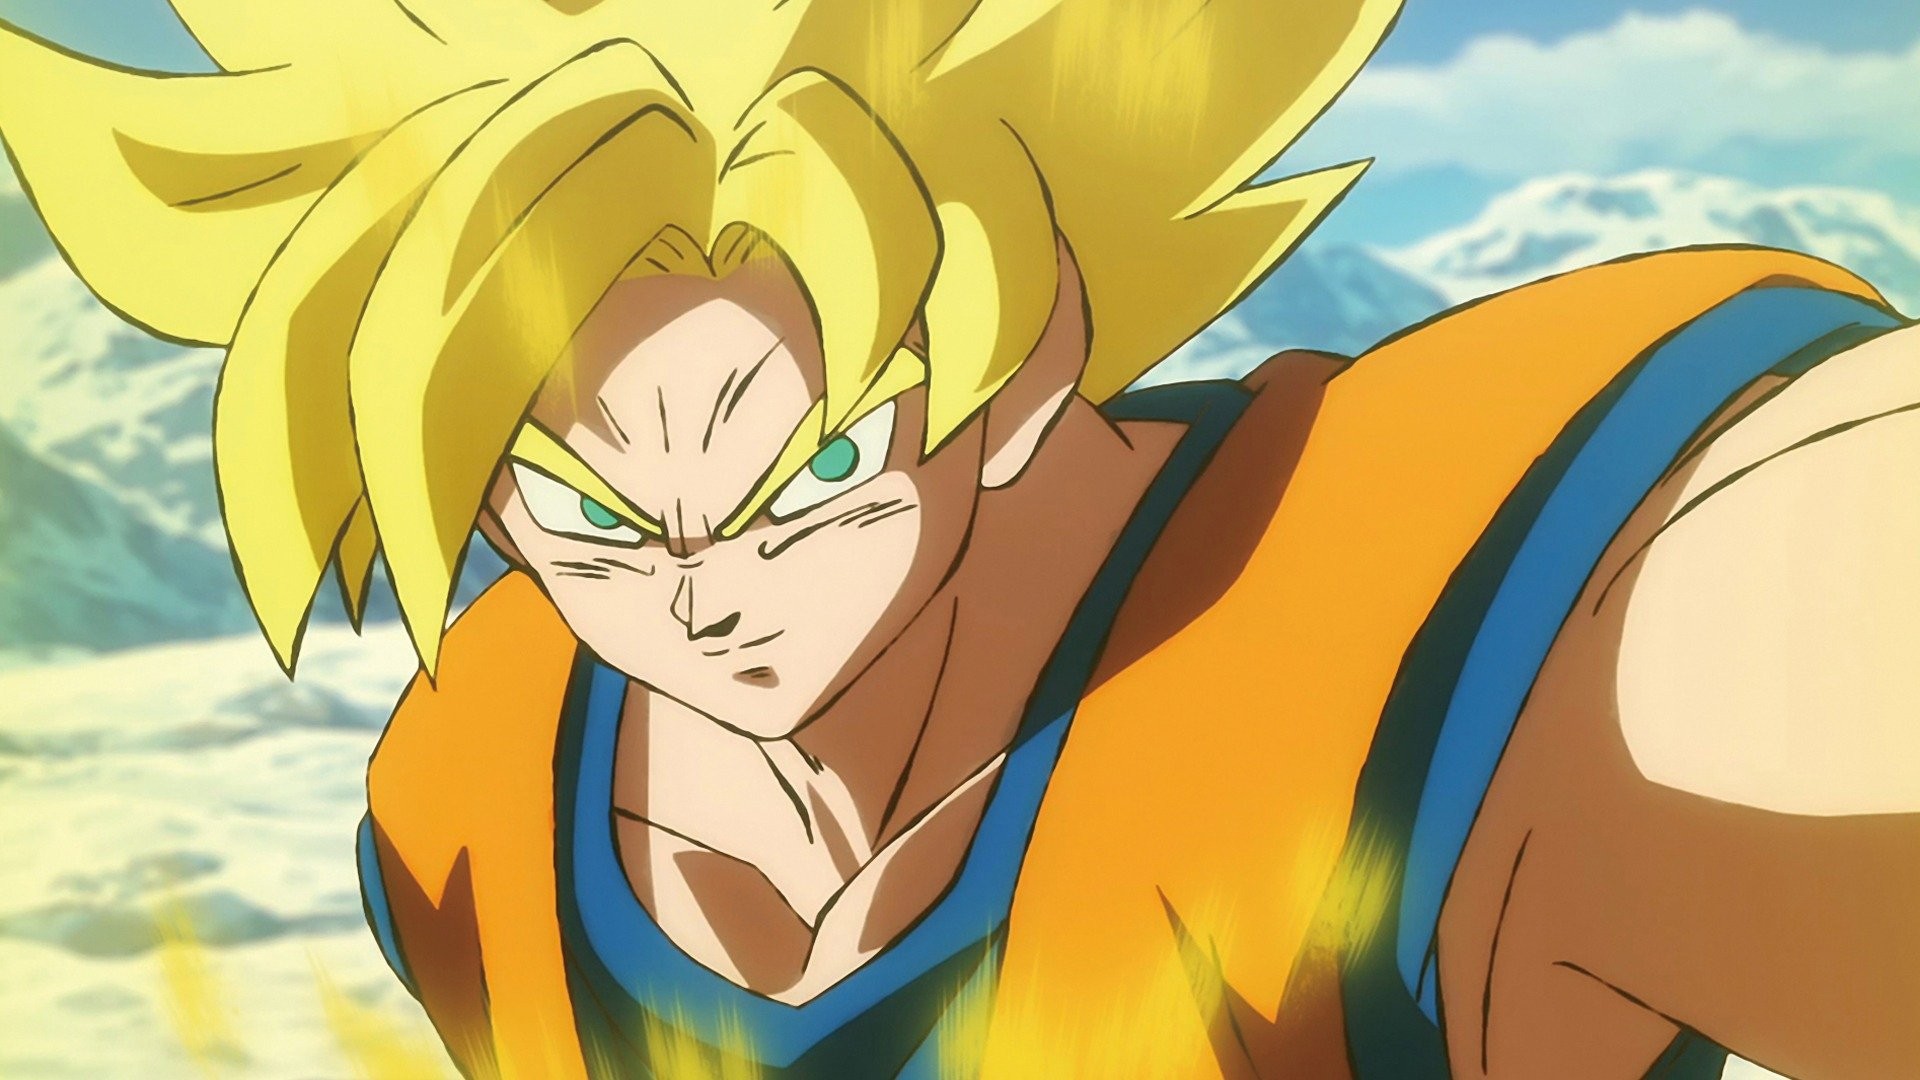 Dragon Ball Super : Broly - The Movie